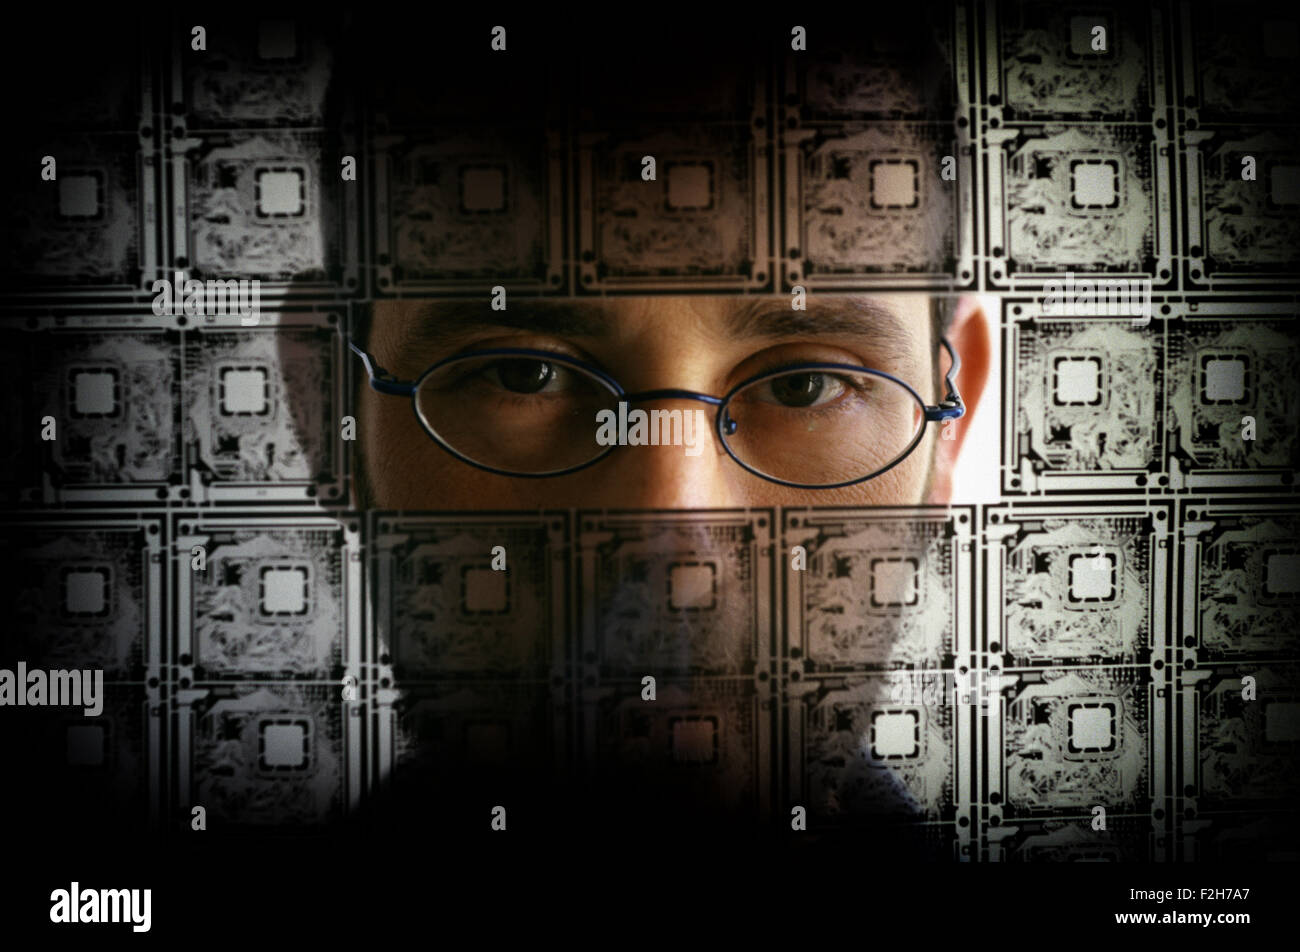 A person looking through transparent electric circuit board and barbed wire Stock Photo